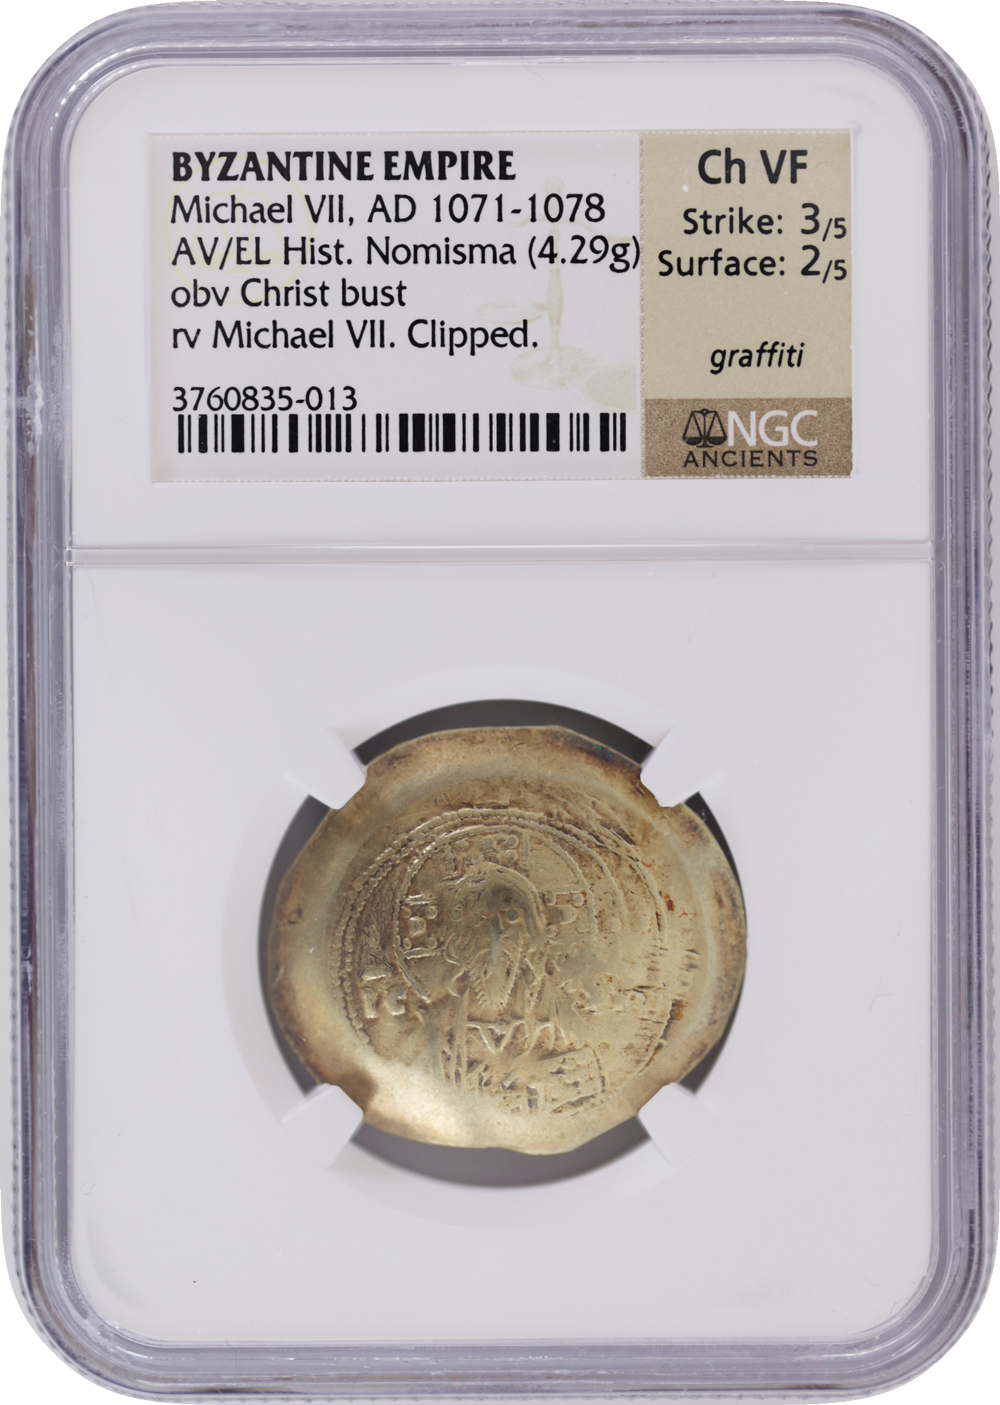 70％OFFアウトレット アンティークコイン コイン 金貨 銀貨 送料無料 1940 SILVER UNITED STATES MERCURY  DIME COIN NGC PROOF 65